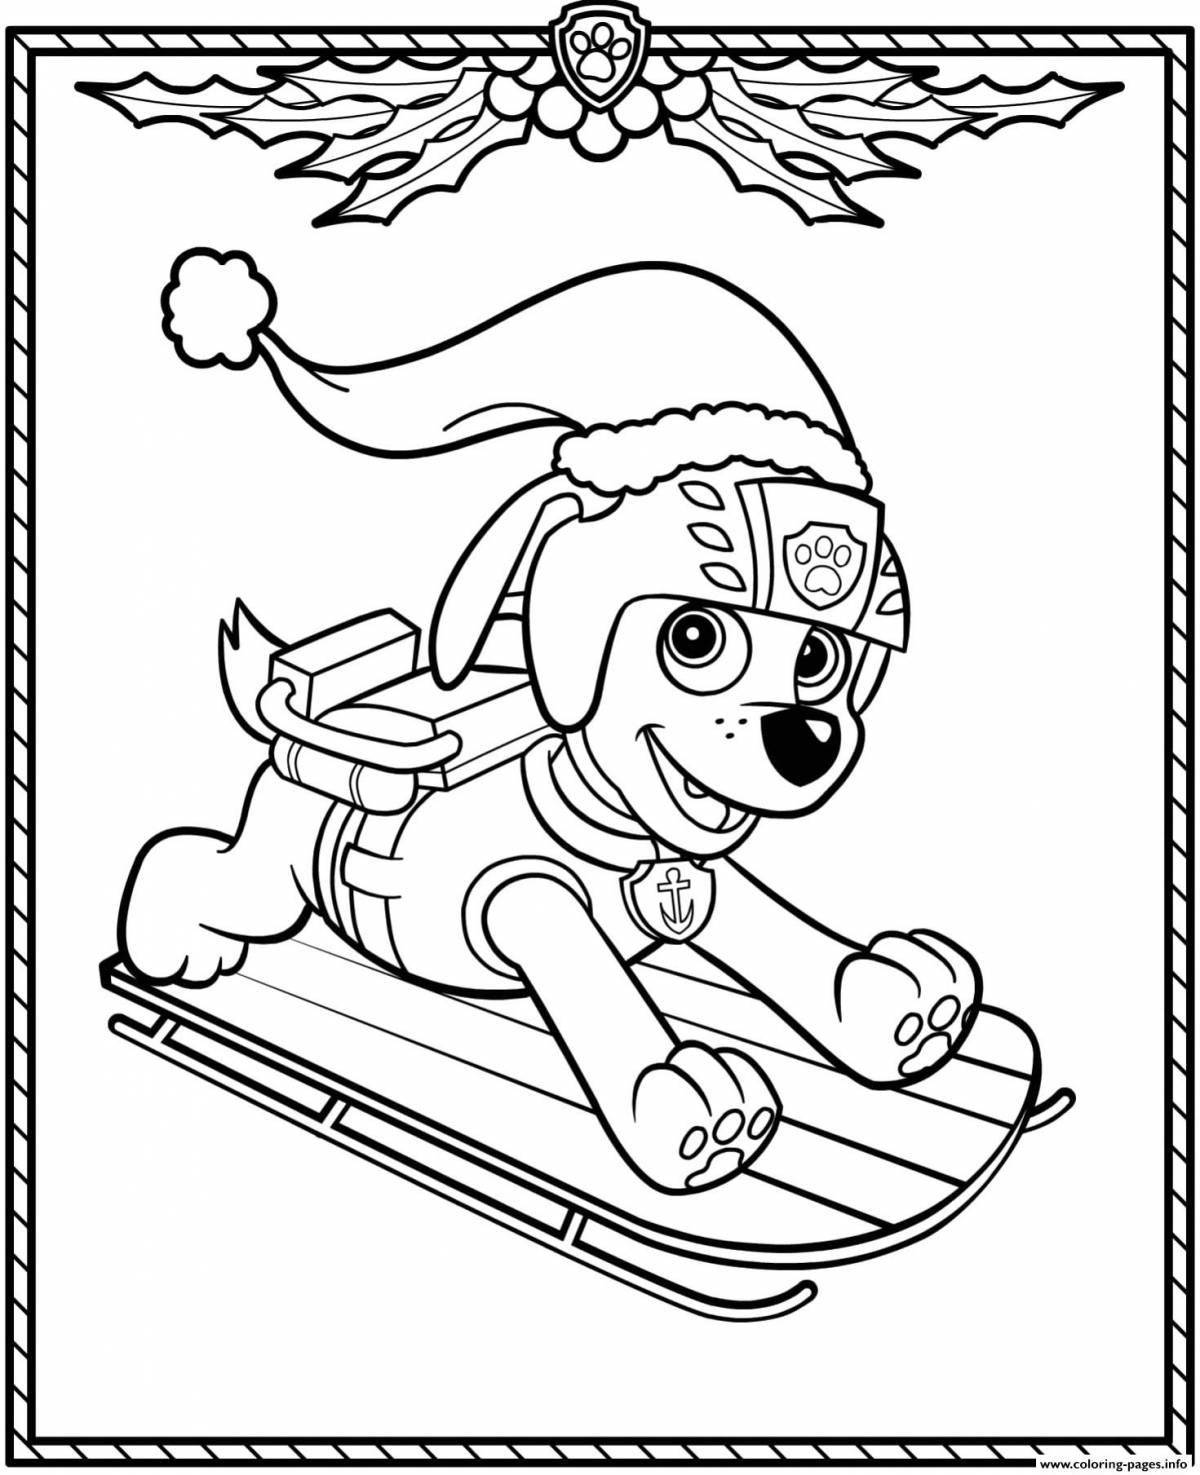 Coloring page happy water paw patrol